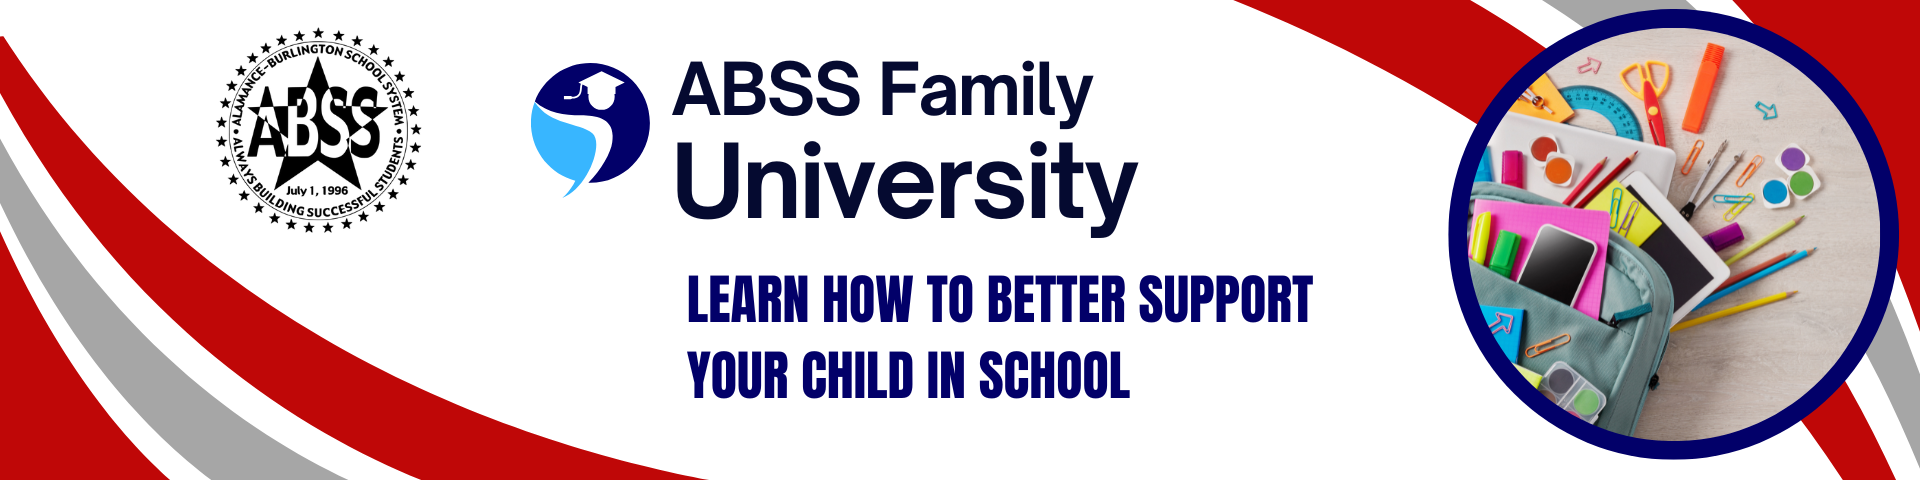 Header image with blue and grey swoosh borders.  A photograph on the right shows a backpack with school supplies spilling out.  ABSS logo is on the left.  Text in middle reads "ABSS Family University" and "Learn How to Support Your Child in School"